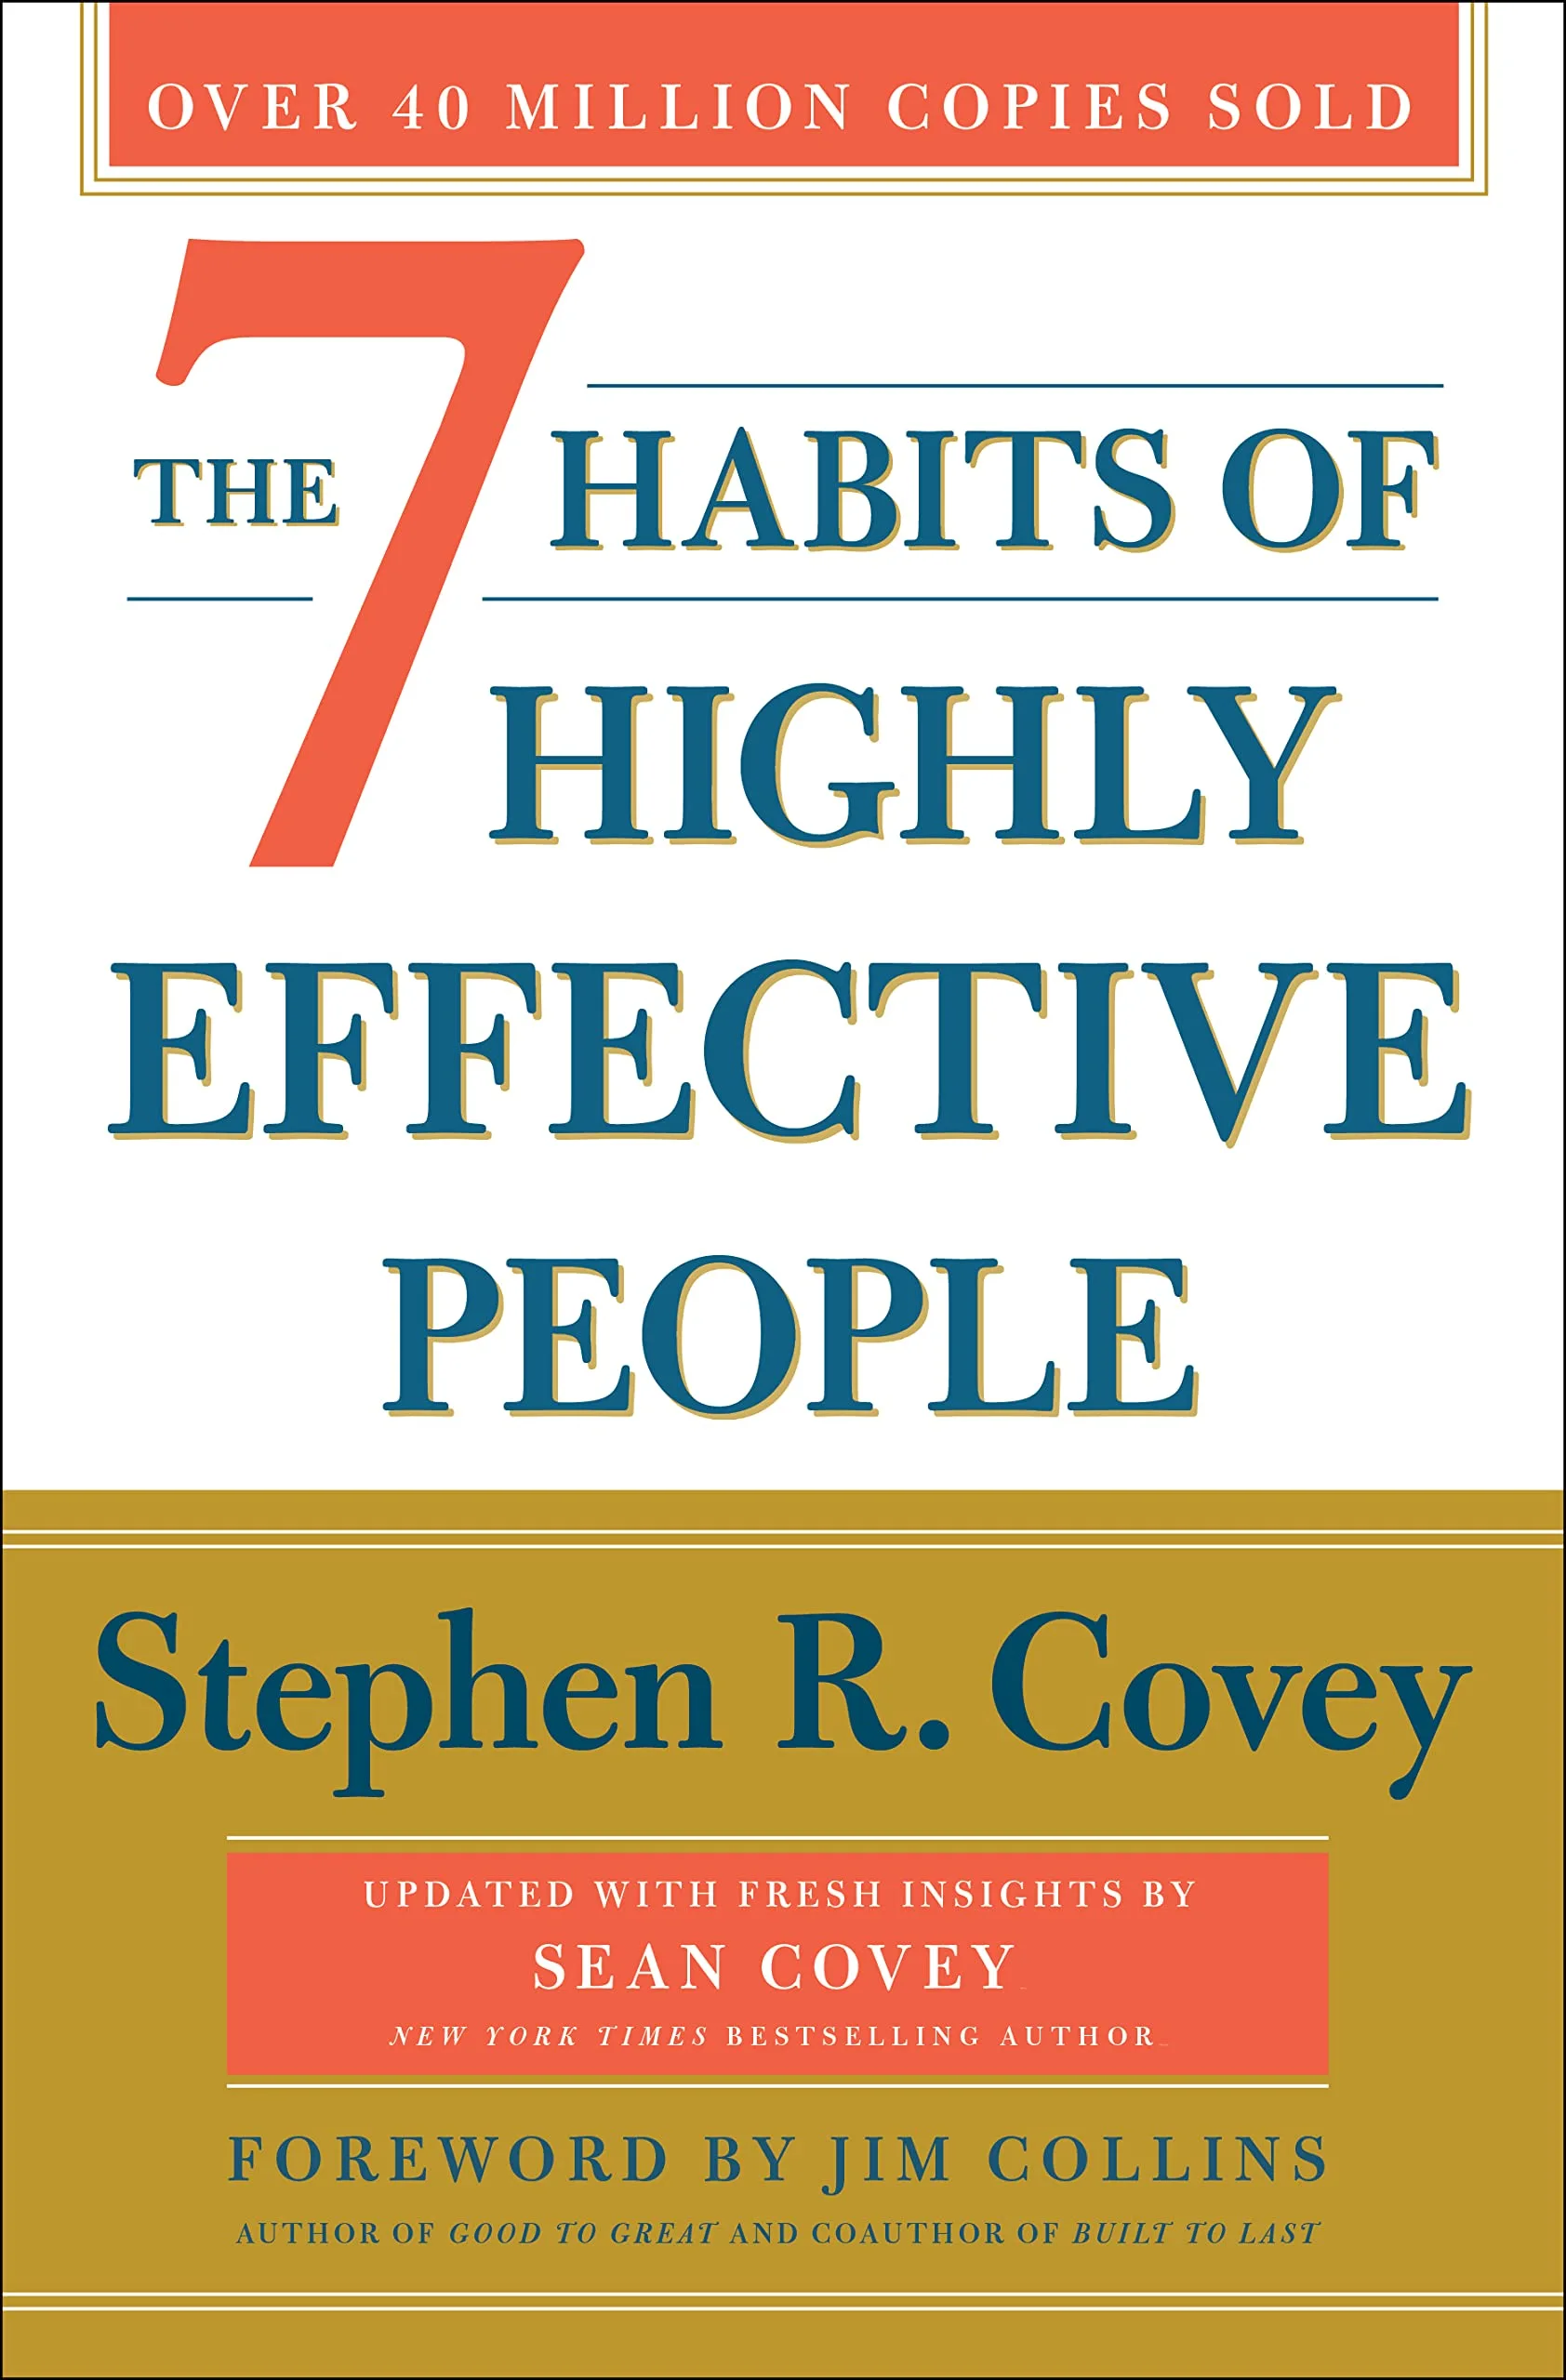 7 habits of Highly Effective People by Stephen R. Covey